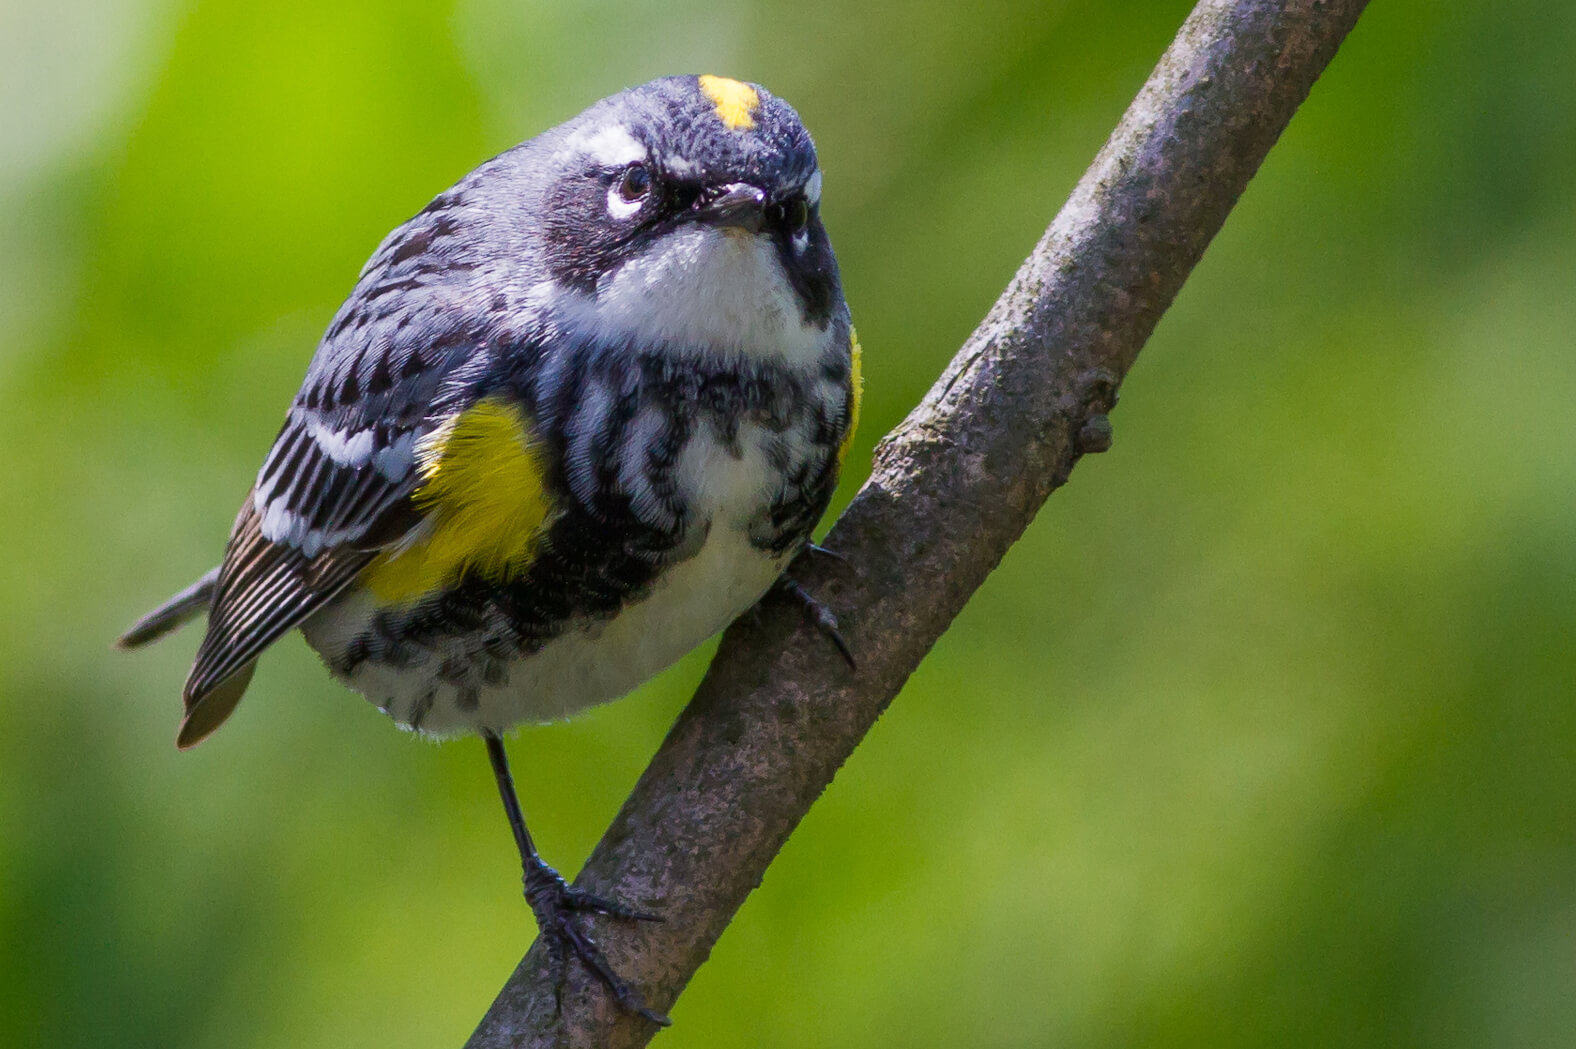 Myrtle Warblers were arriving in groups to make use of the reserve for resting and feeding. Photo by Elliotte Rusty Harold/Shutterstock.